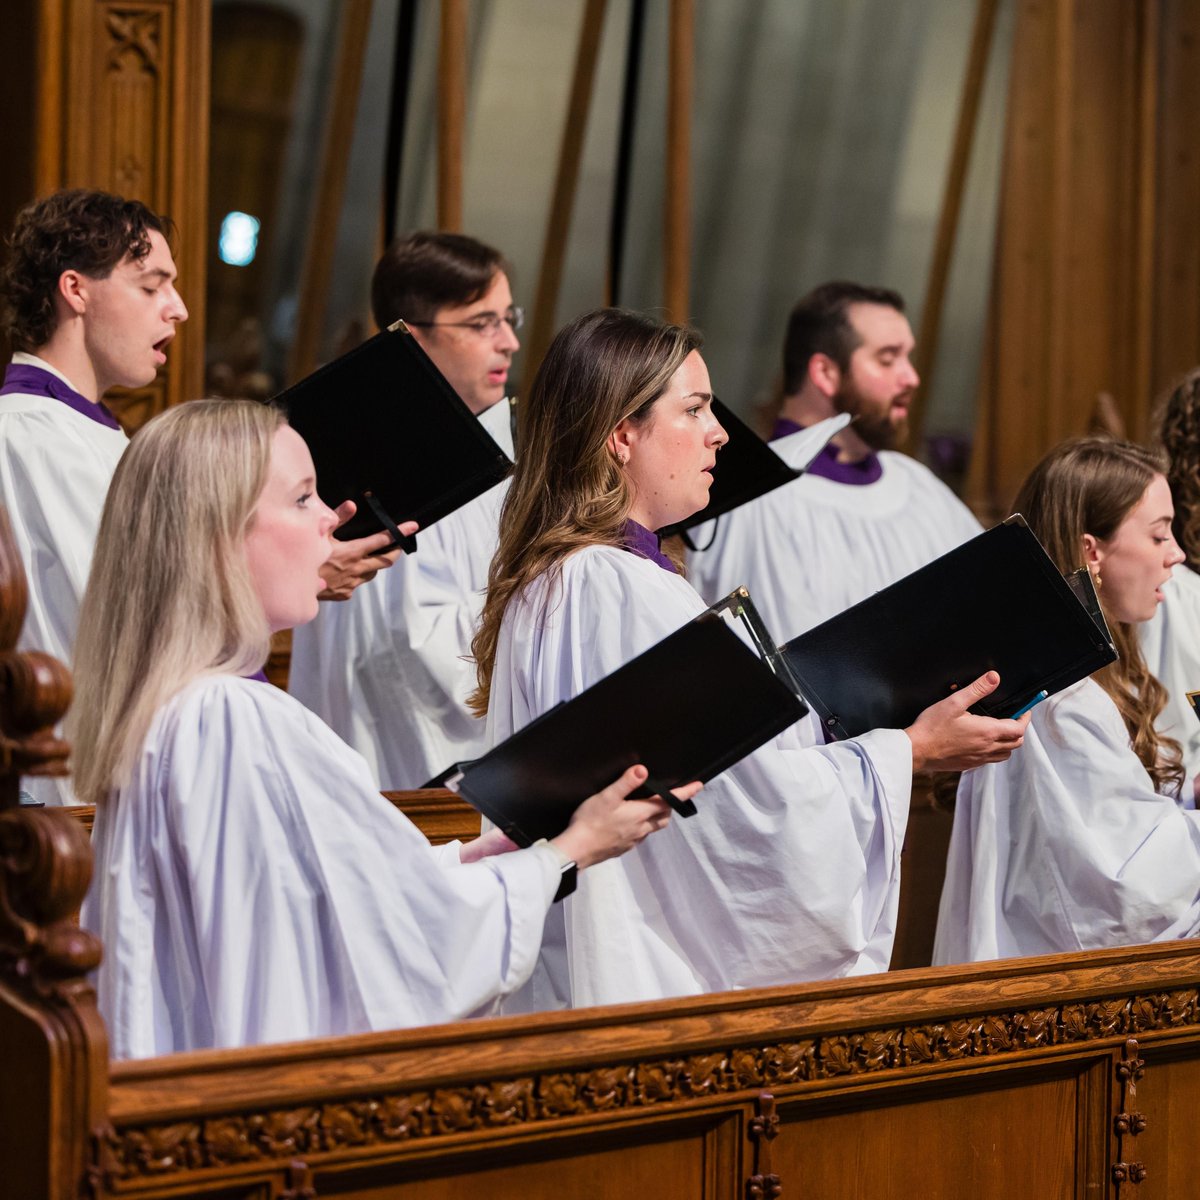 Music for our Choral Evensong service this Sunday at 4:00 p.m. includes Rheinberger's beautiful 'Abendlied' and Bairstow's rousing Eastertide anthem 'Sing Ye to the Lord.' The Canticles are from Stanford's 'Evening Service in A.' Details and livestream: buff.ly/44fNli8